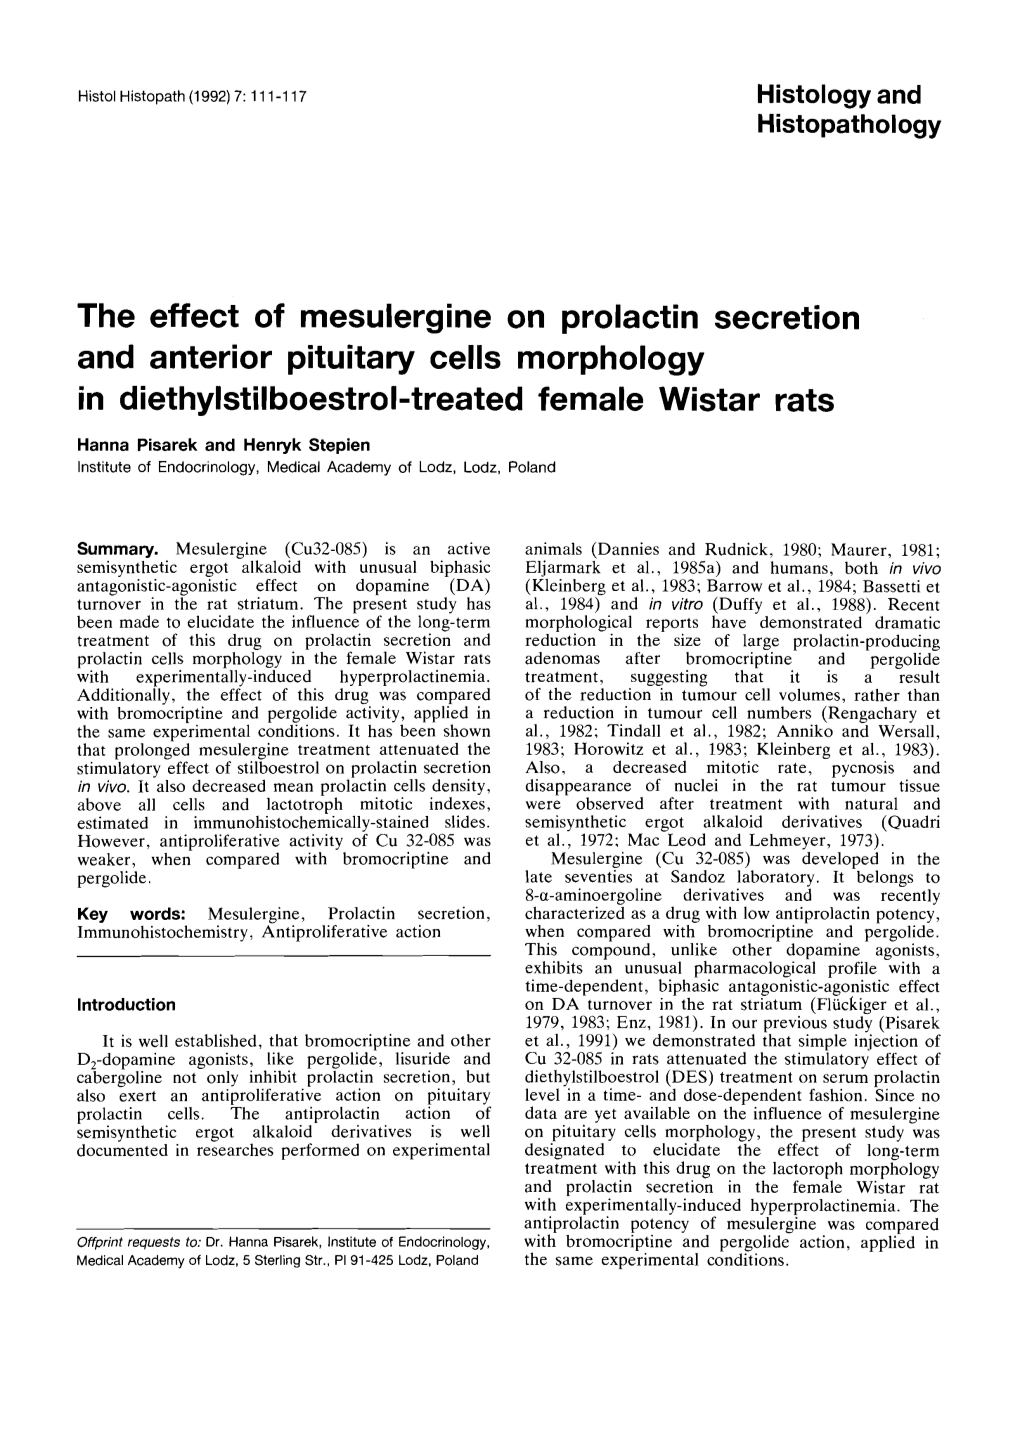 The Effect of Mesulergine on Prolactin Secretion and Anterior Pituitary Cells Morphology in Diethylstilboestrol-Treated Female Wistar Rats